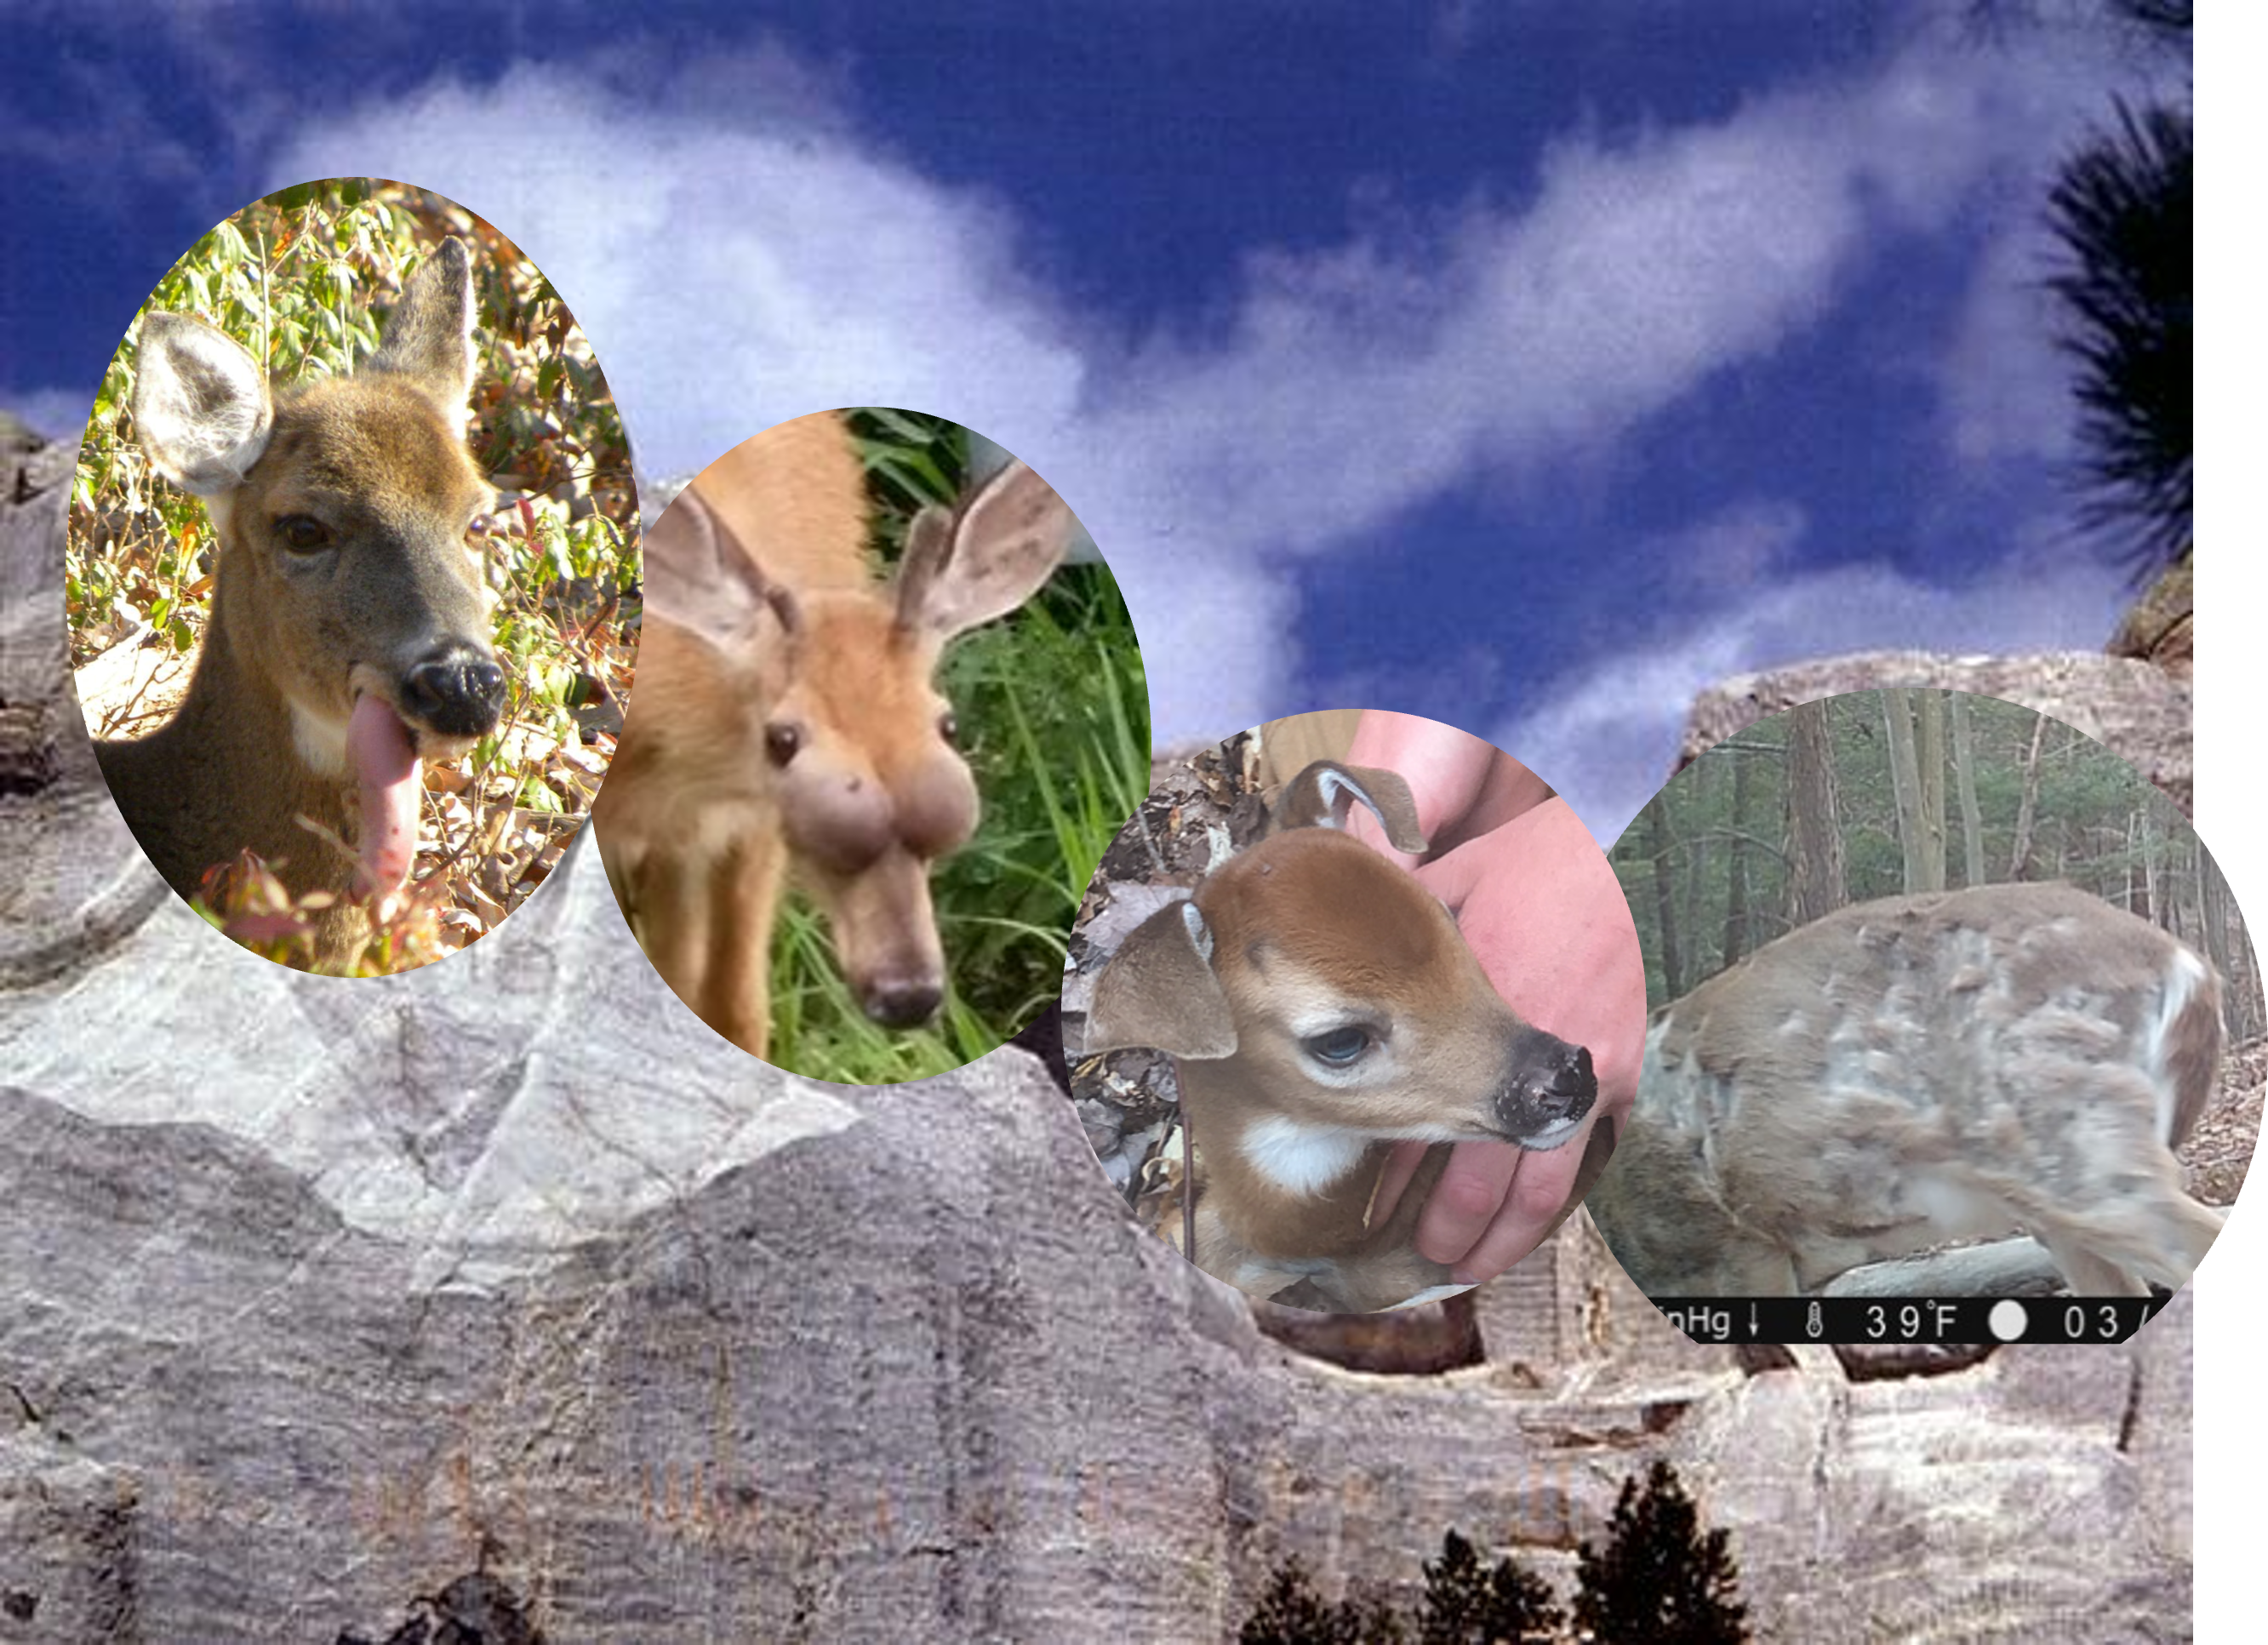 Mount Rushmore with picture of deer with floppy tongue, bulging sinuses, floppy ears, and bald patches transposed on the presidential faces